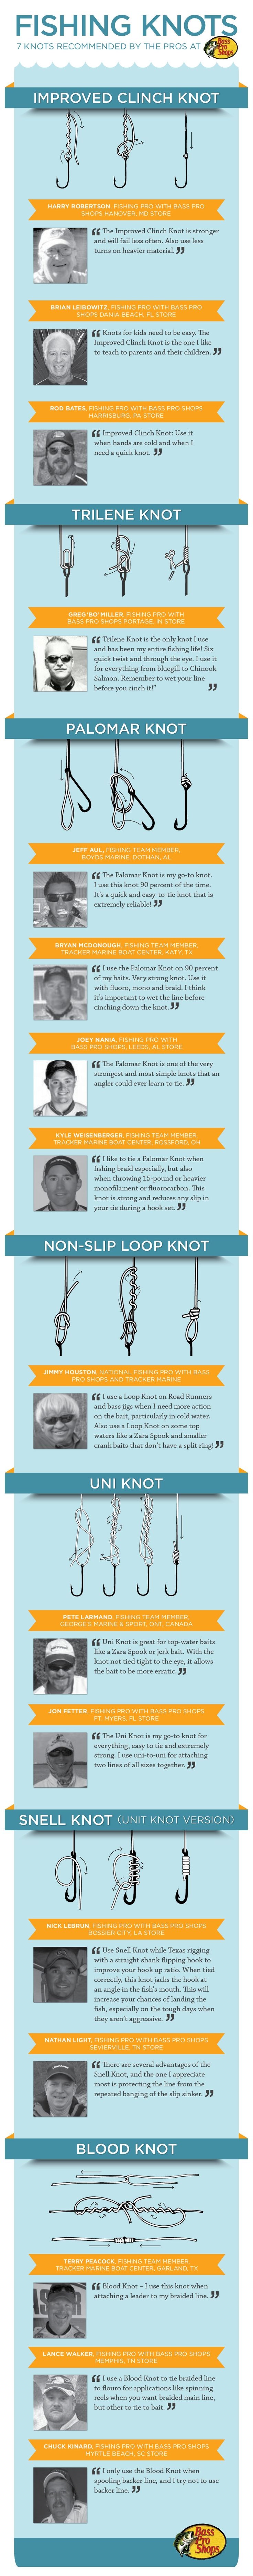 Fishing Knots - 7 Knots Recommended by the Pros at...